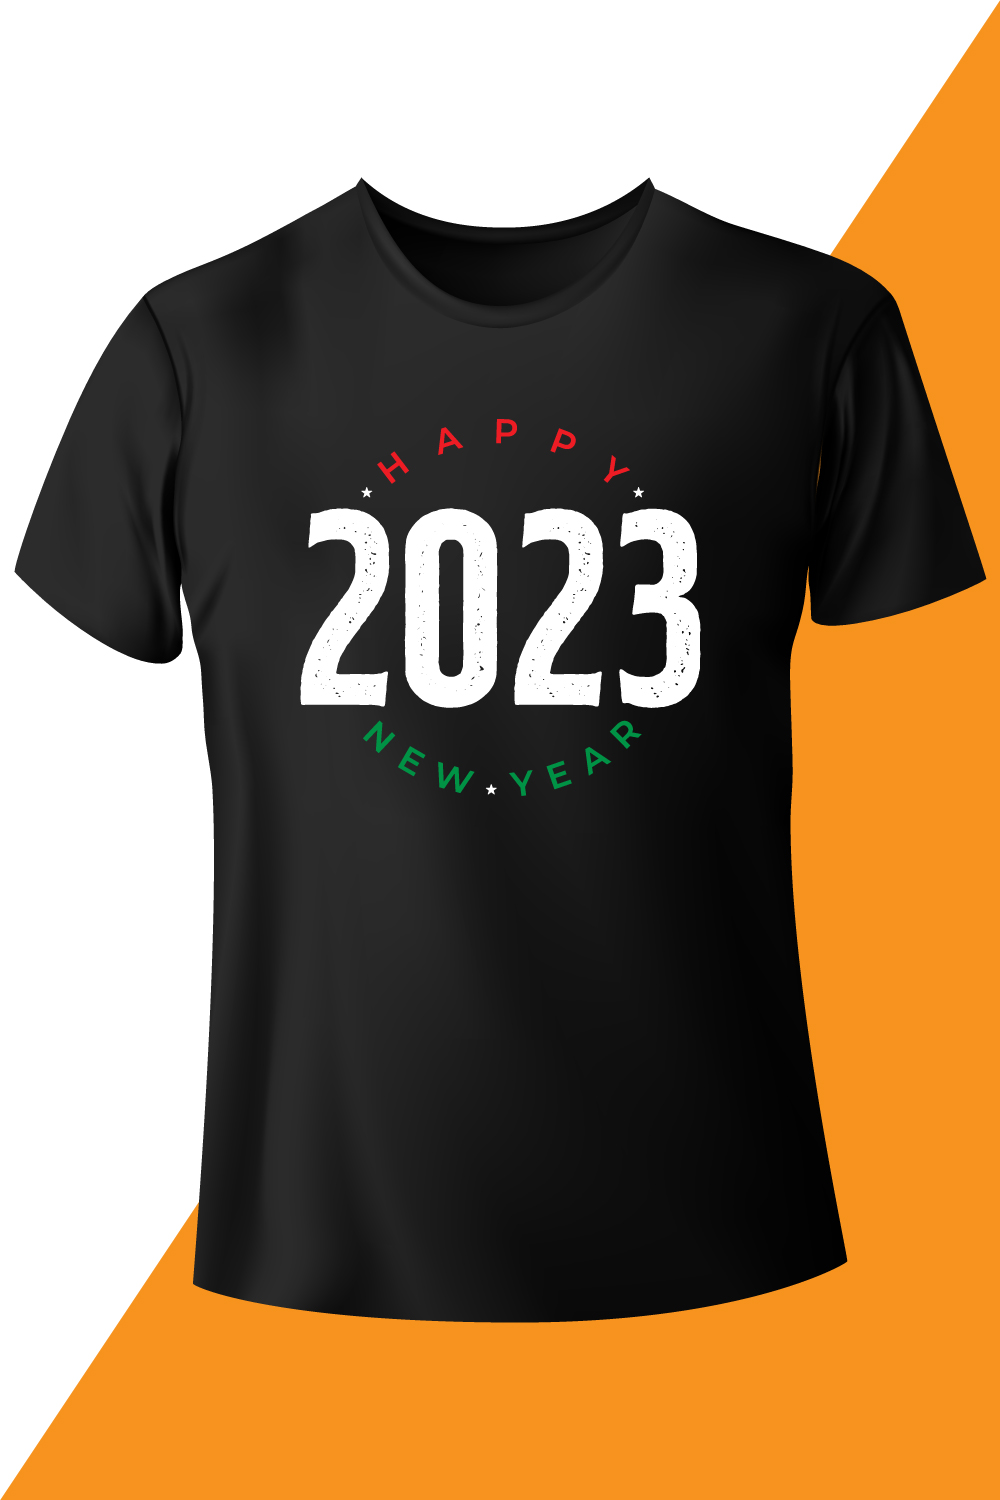 Image of a black T-shirt with a colorful print on the theme of the New Year.